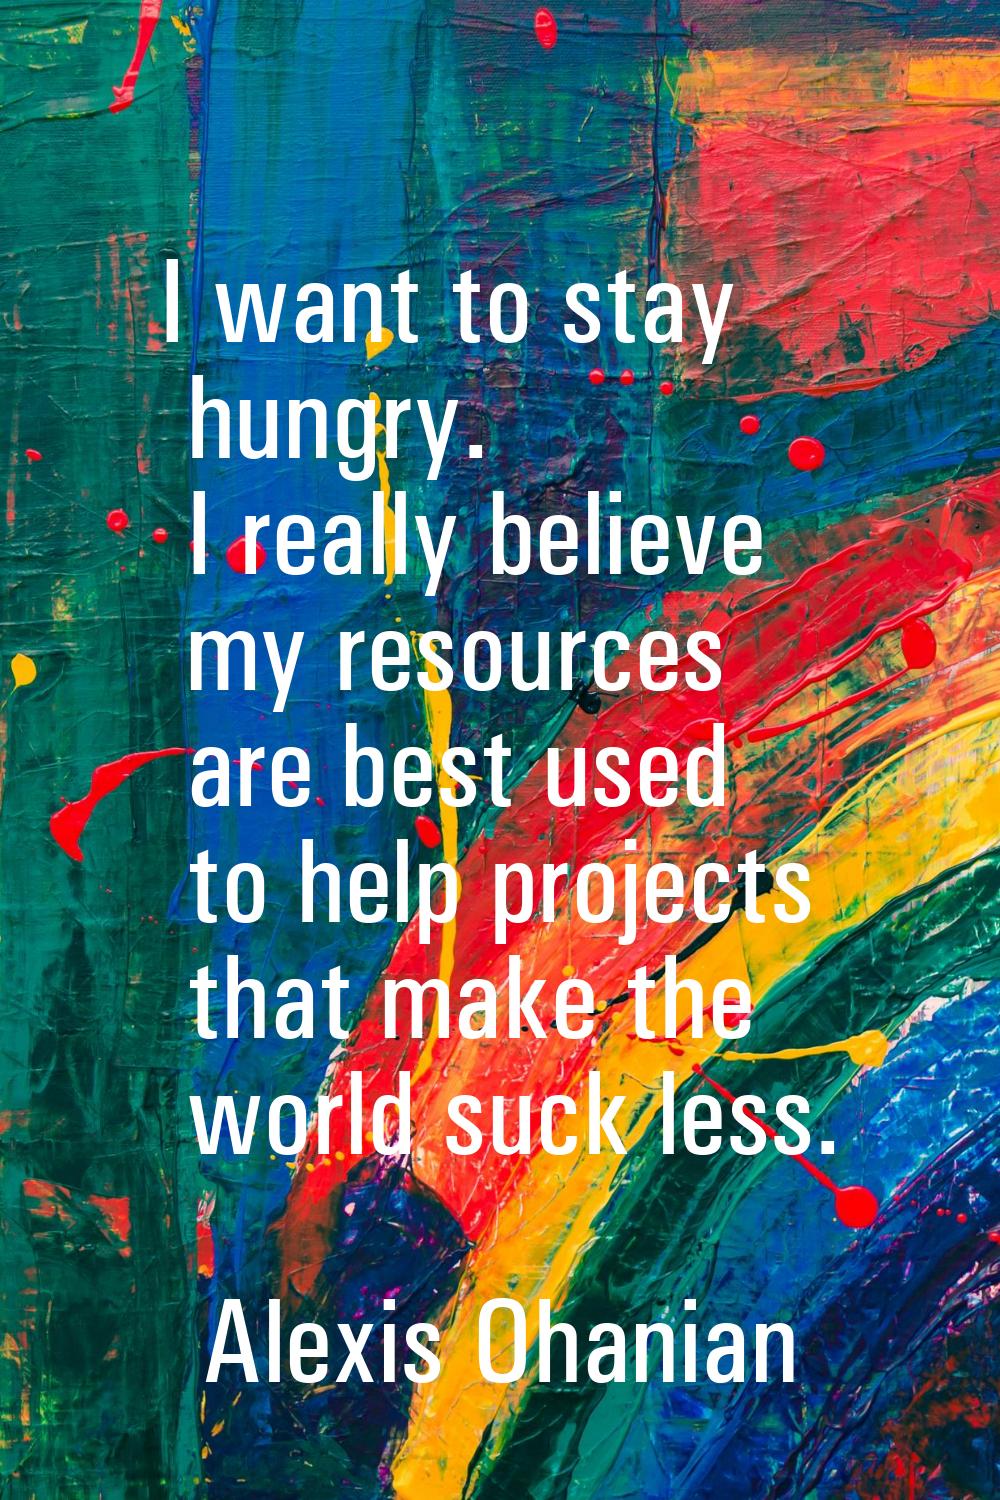 I want to stay hungry. I really believe my resources are best used to help projects that make the w